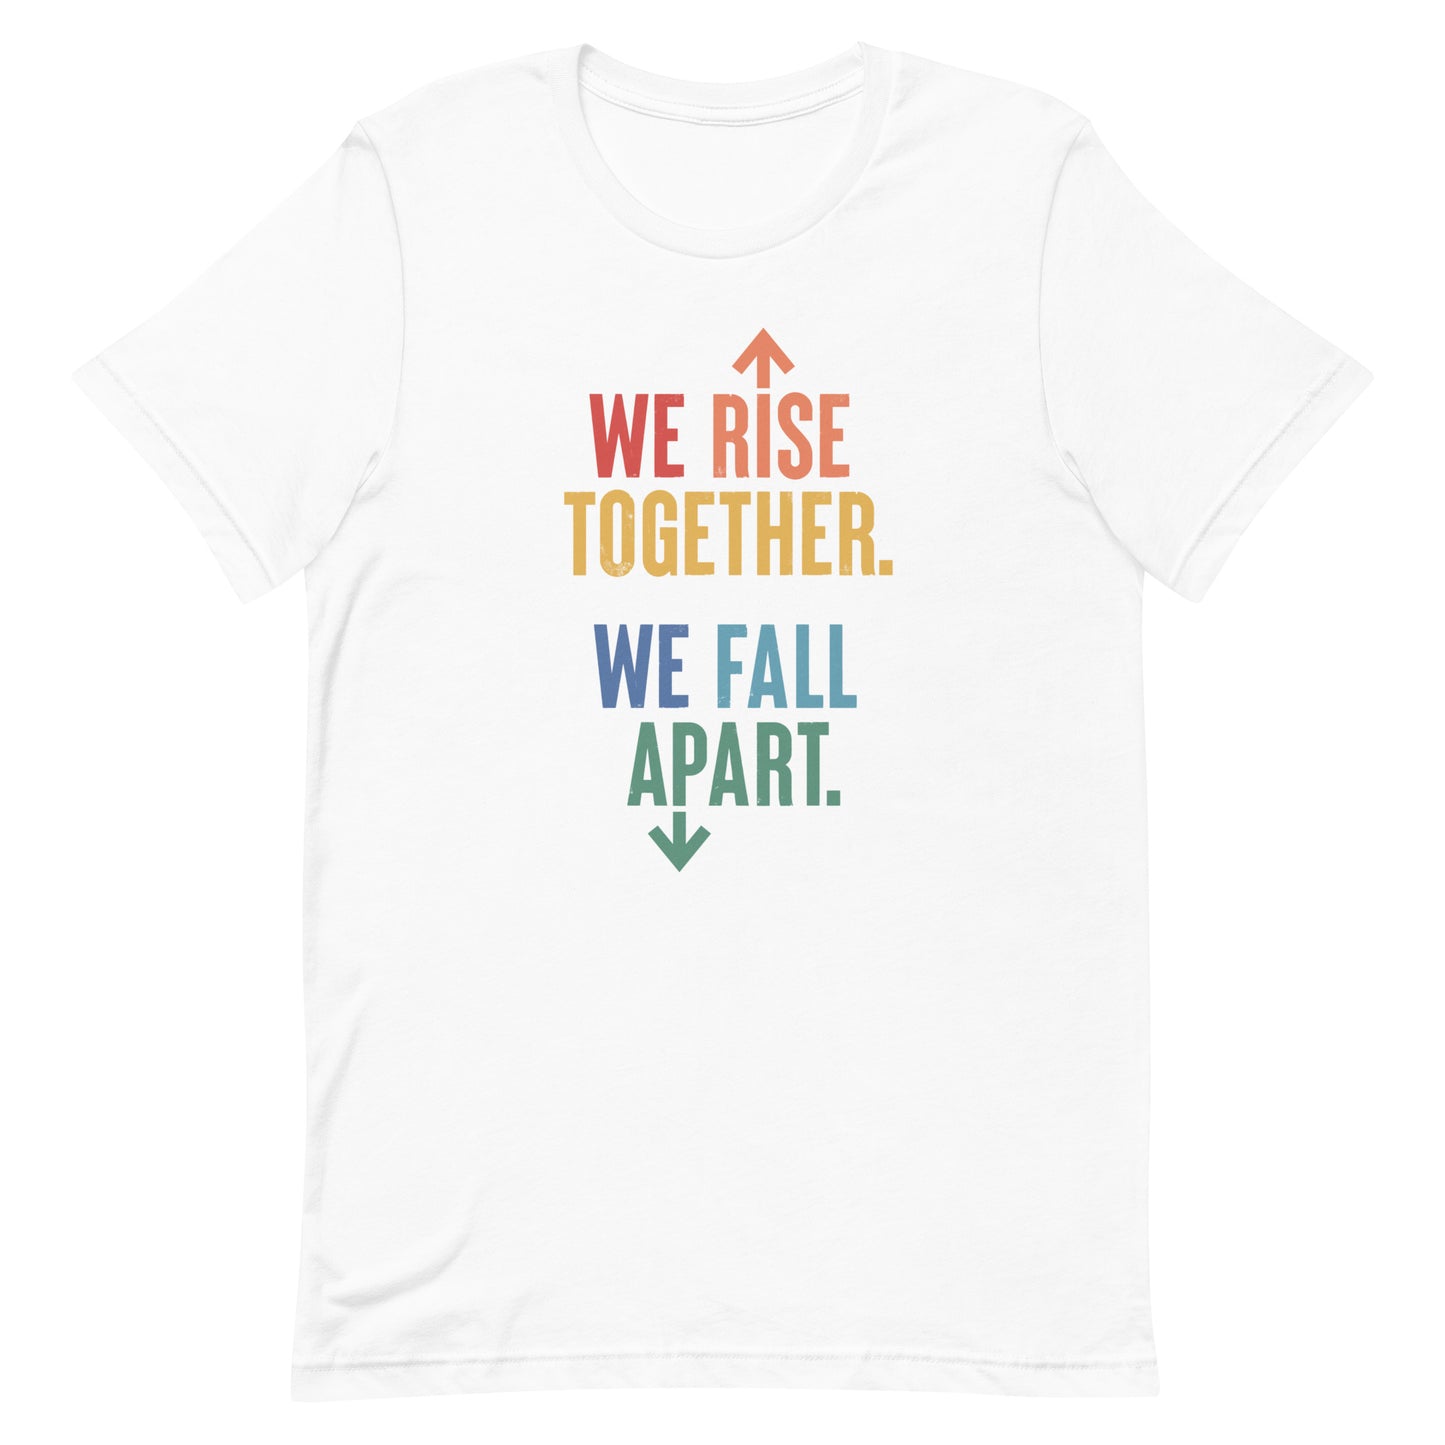 We Rise Together - Men’s/Unisex Tee